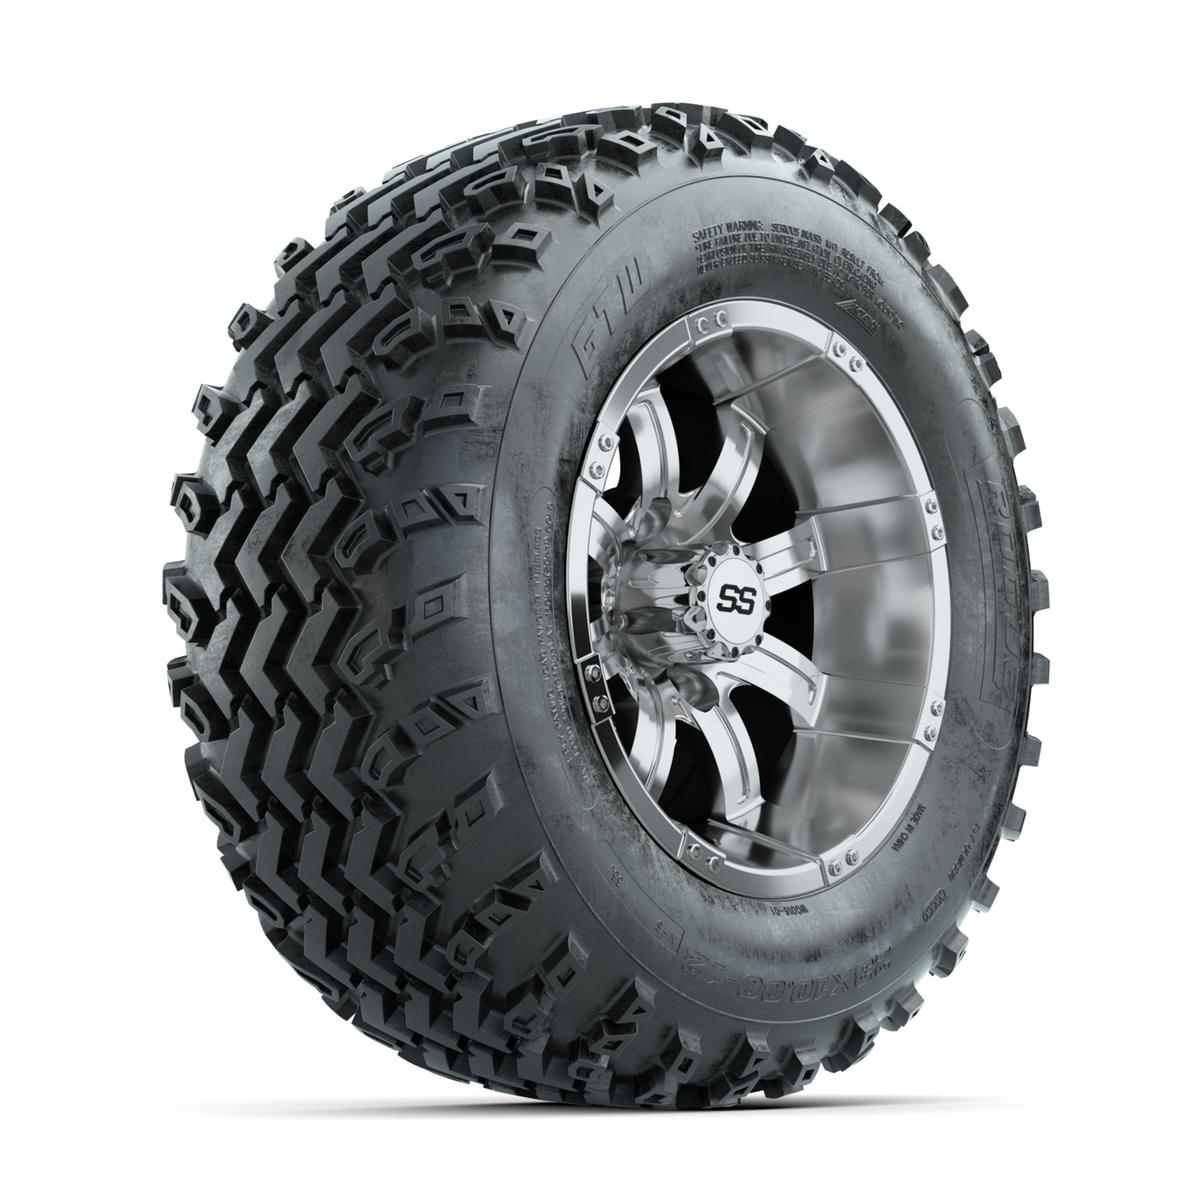 GTW Tempest Chrome 12 in Wheels with 23x10.00-12 Rogue All Terrain Tires – Full Set